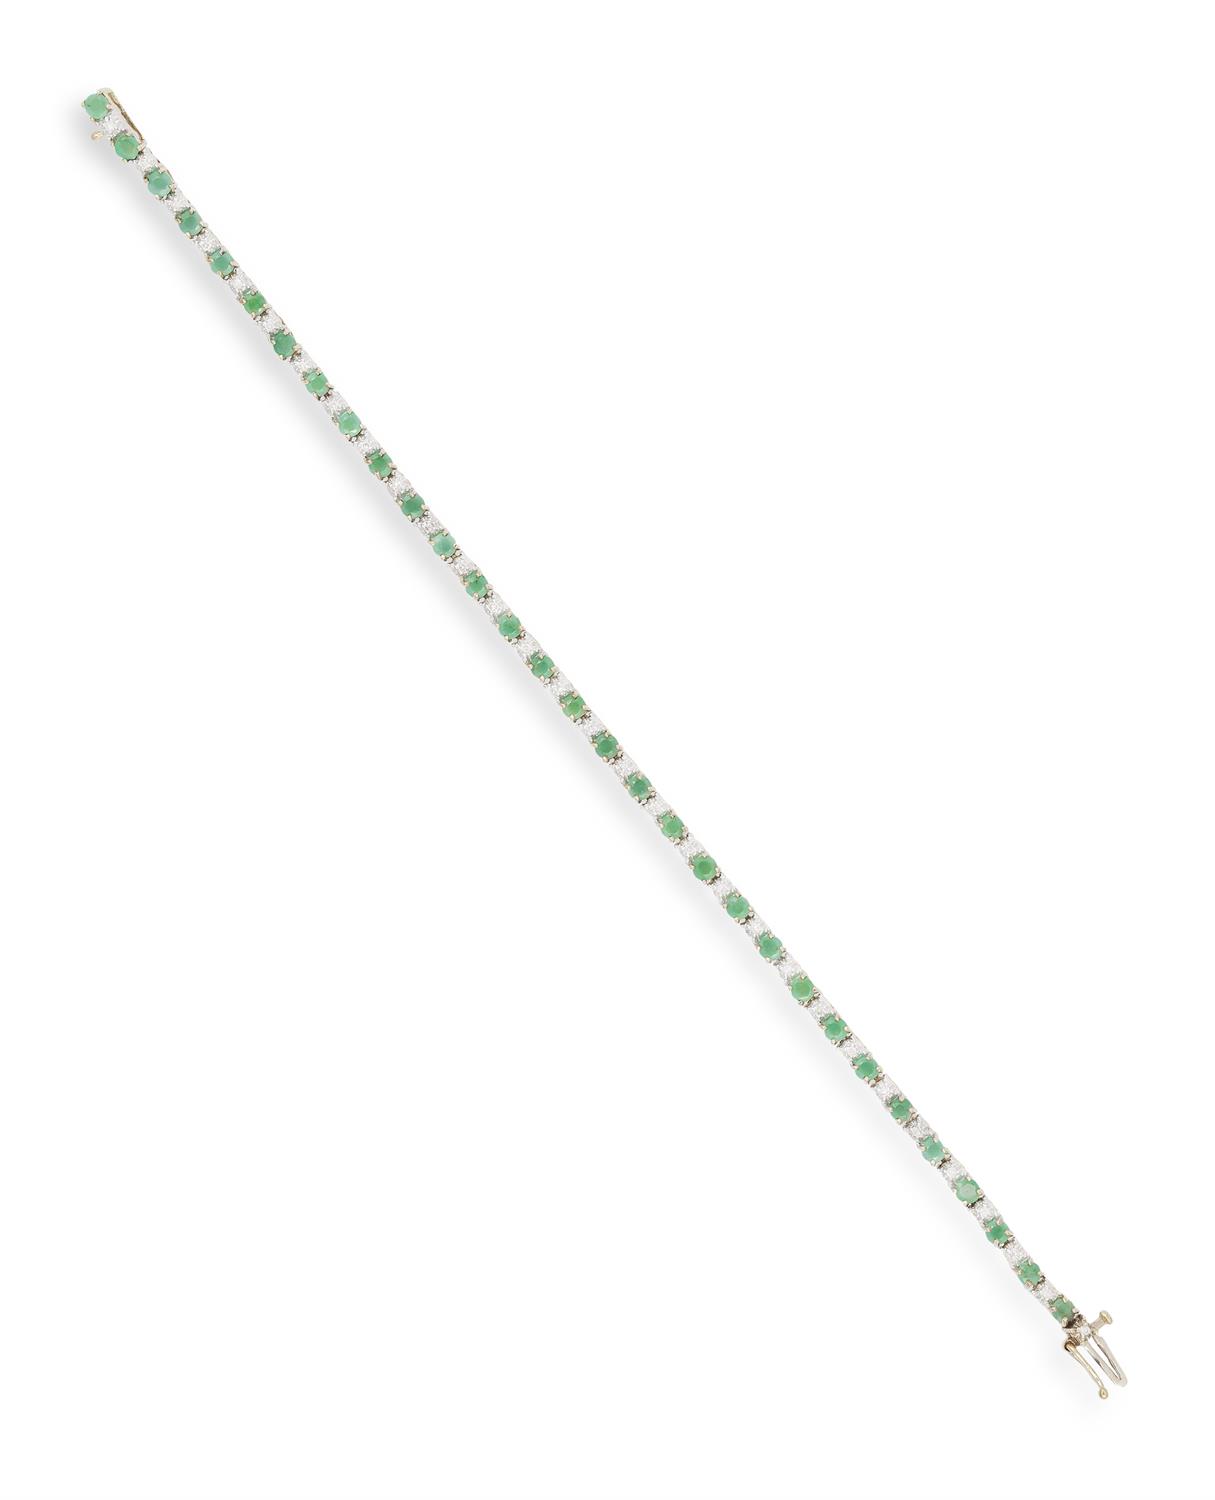 AN EMERALD AND DIAMOND BRACELET, composed of oval-shaped emeralds interspersed by single-cut